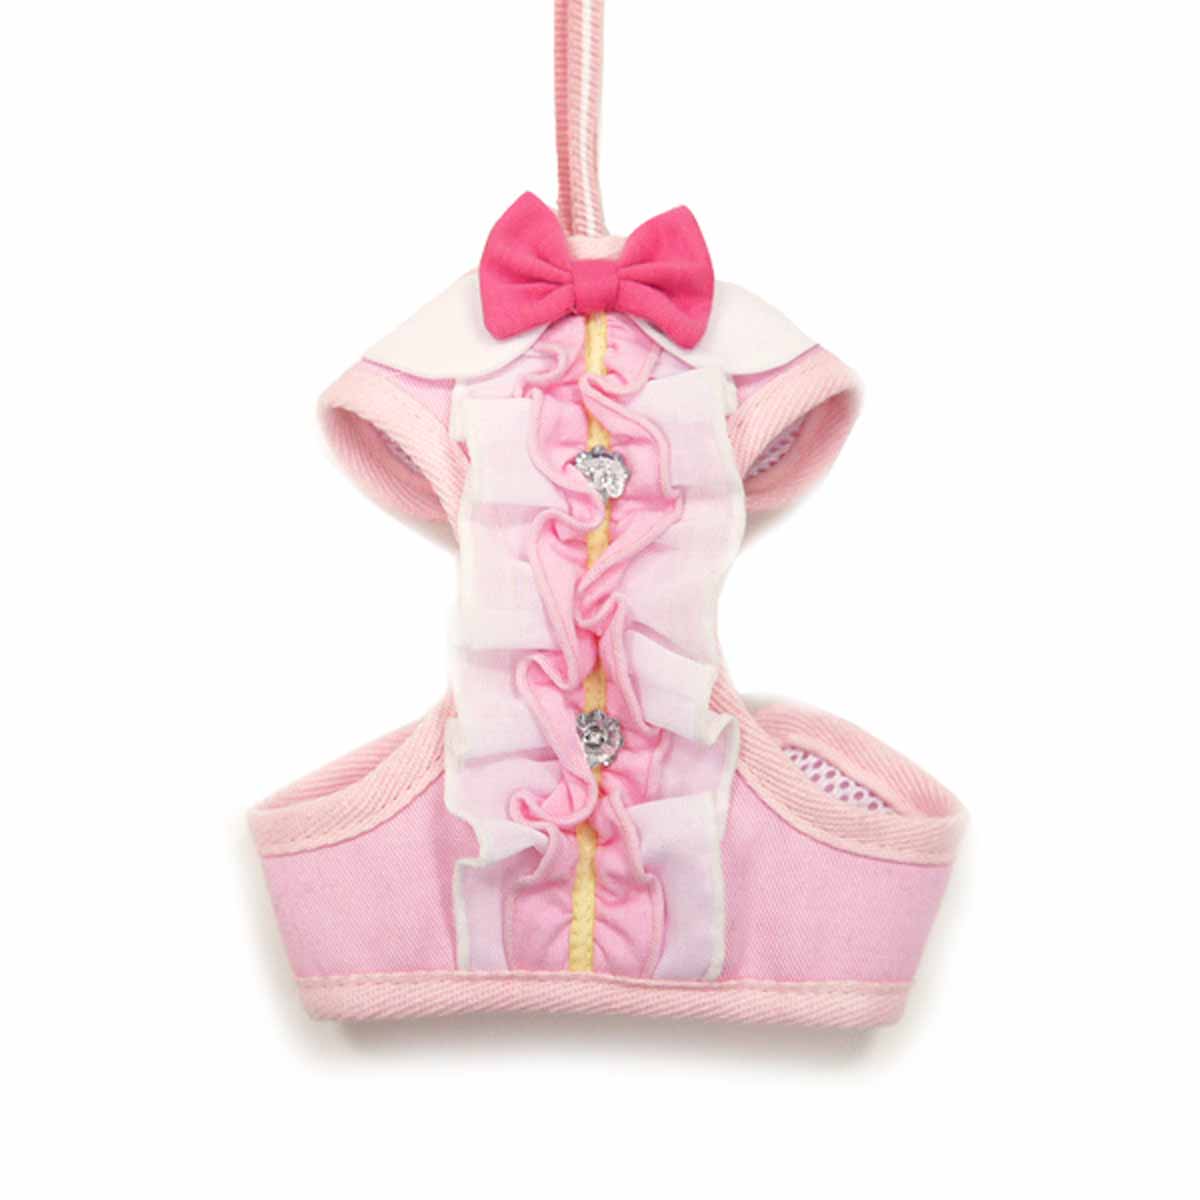 EasyGo Ruffle Dog Harness by Dogo - Pink